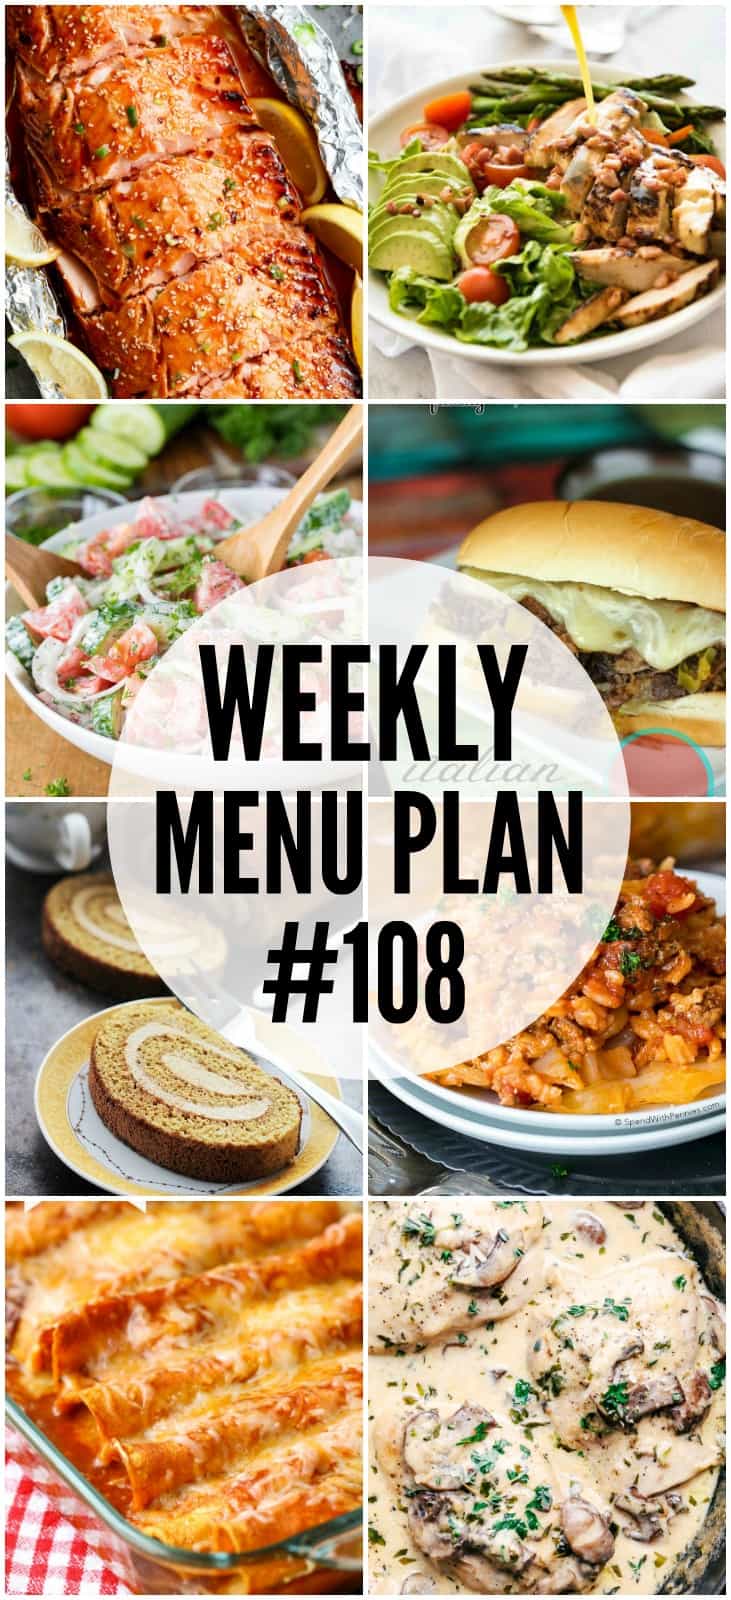 These family favorite recipes will make putting together your weekly menu plan a breeze!